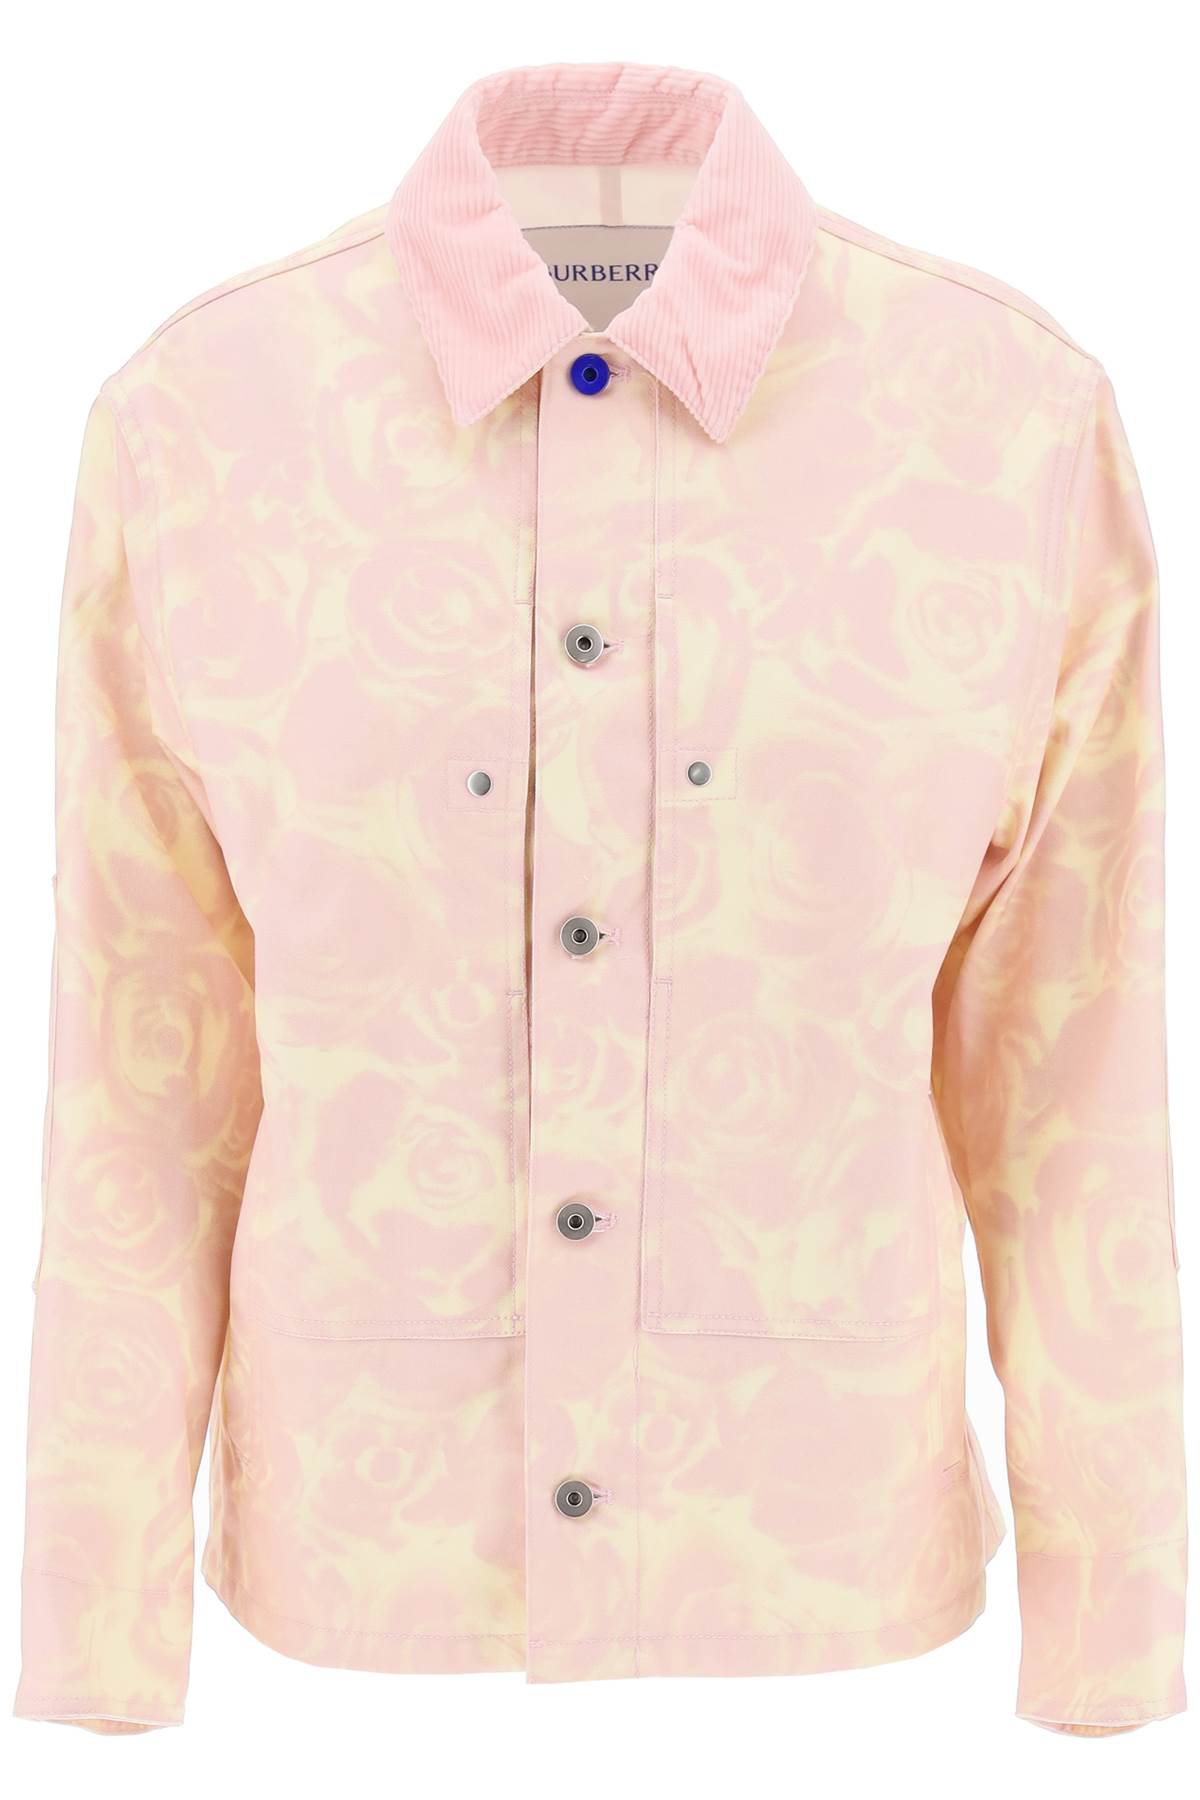 Shop Burberry Floral Print Workwear Style Jacket For Women By  In Pink